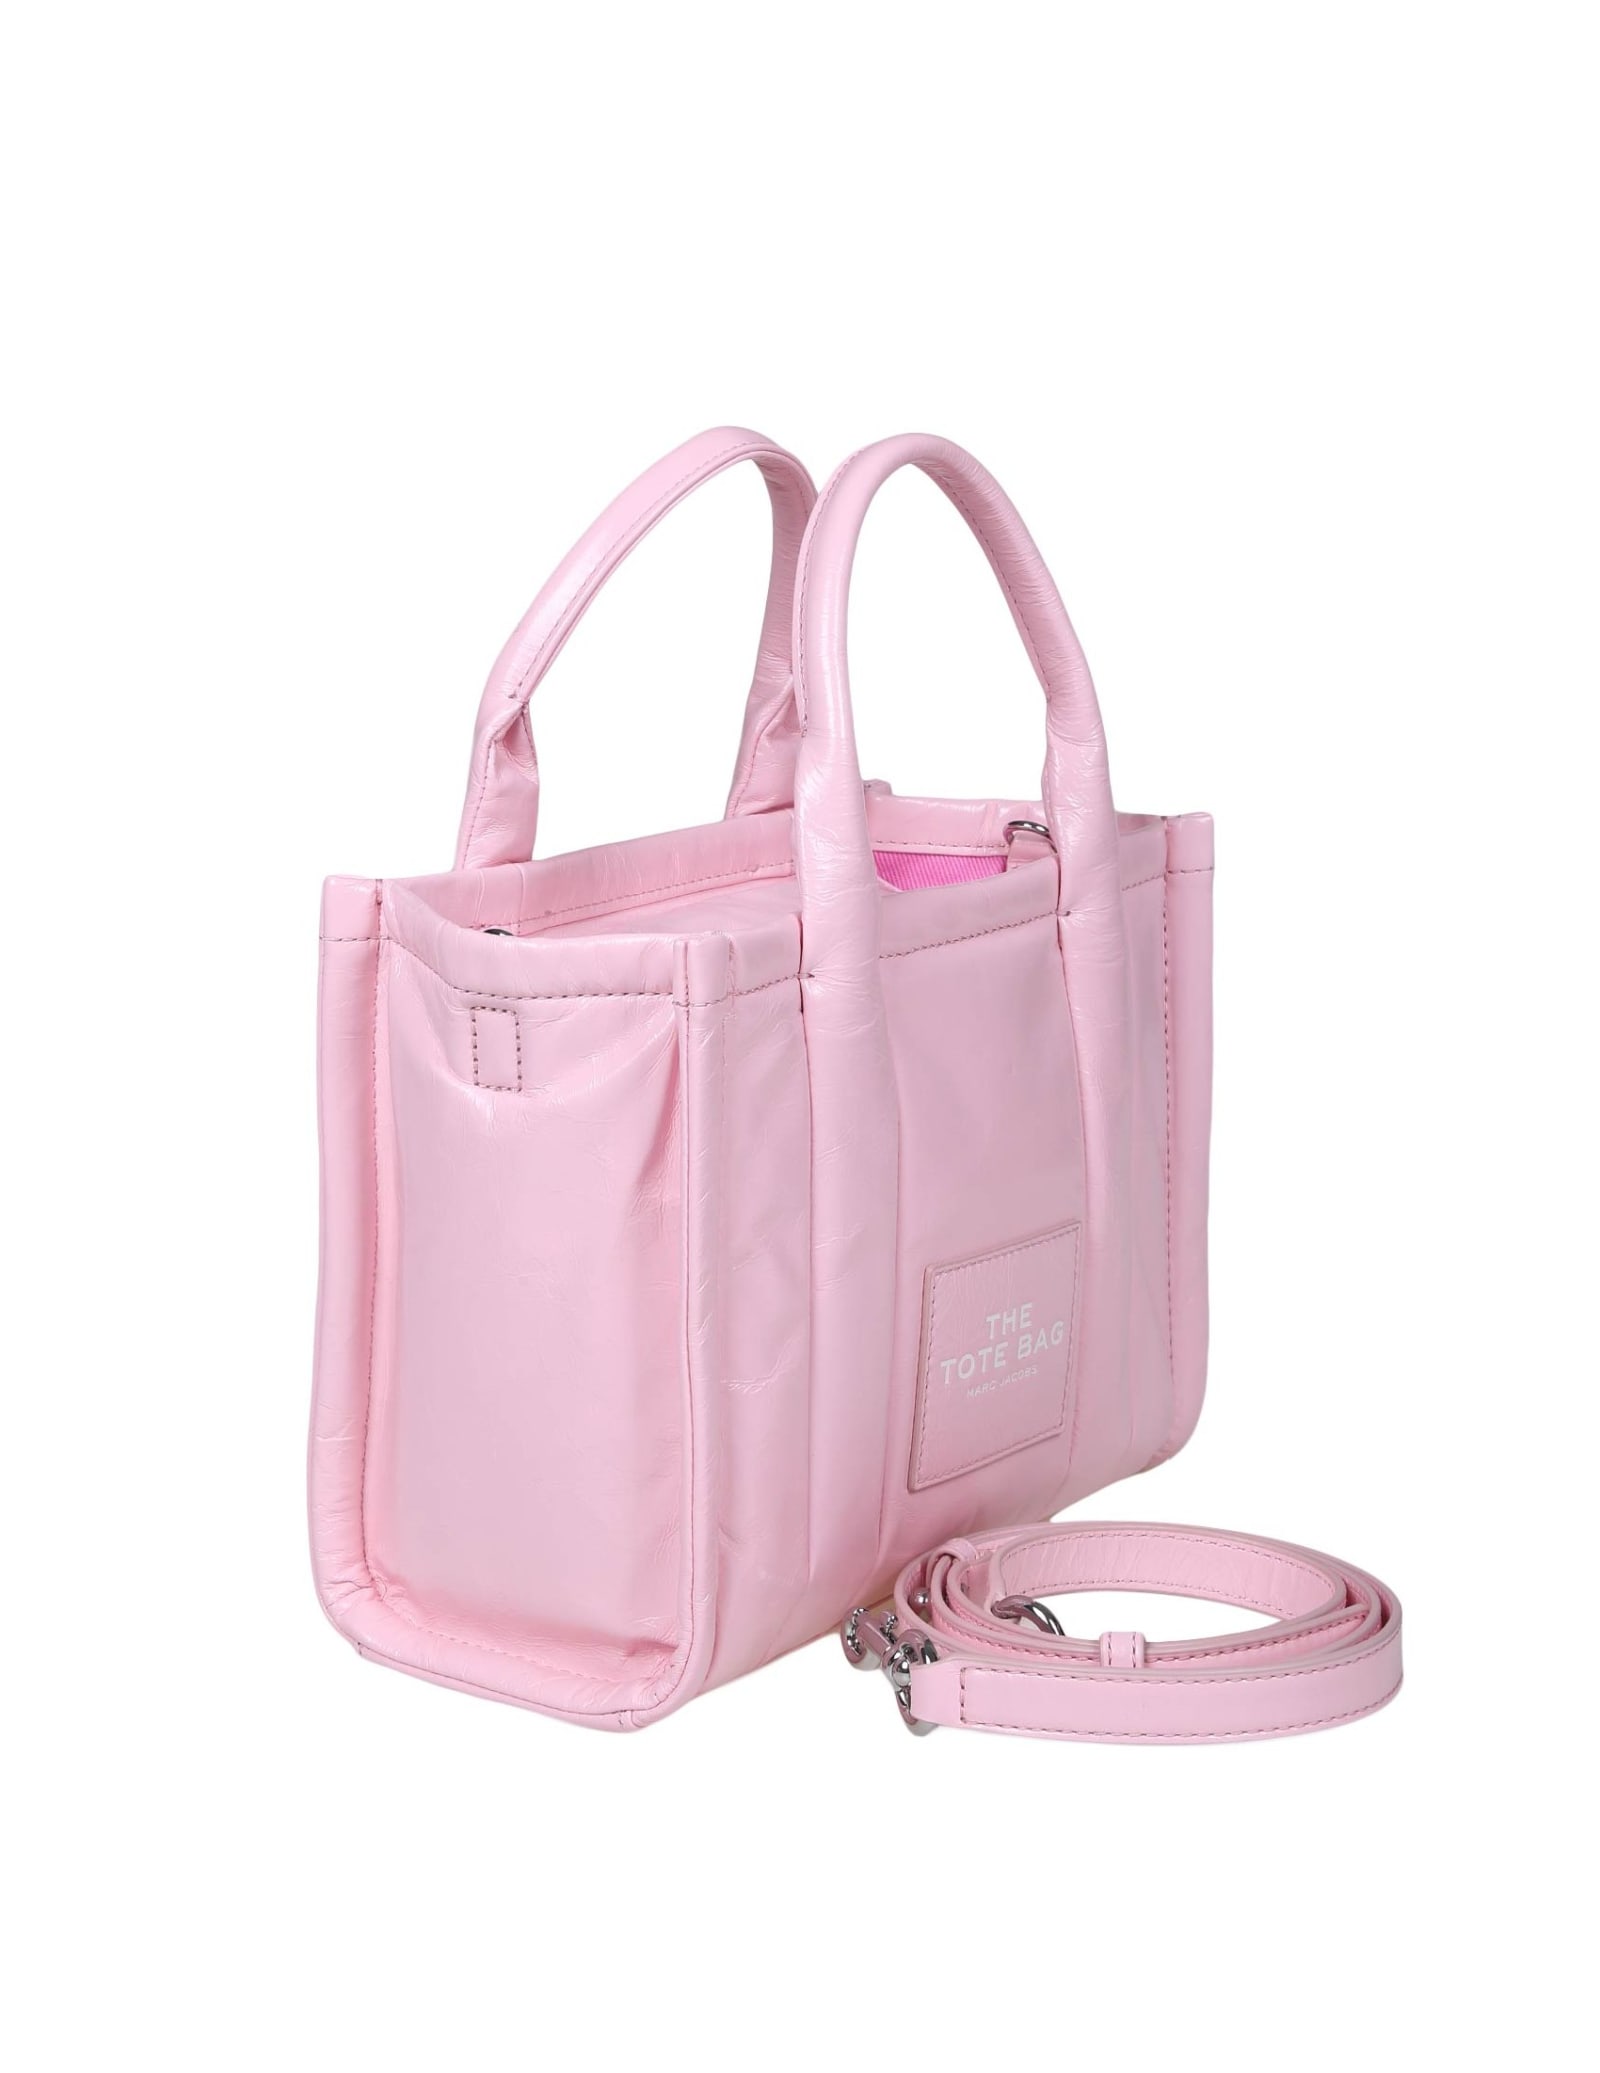 Marc Jacobs The Mini Tote Bag in Pink